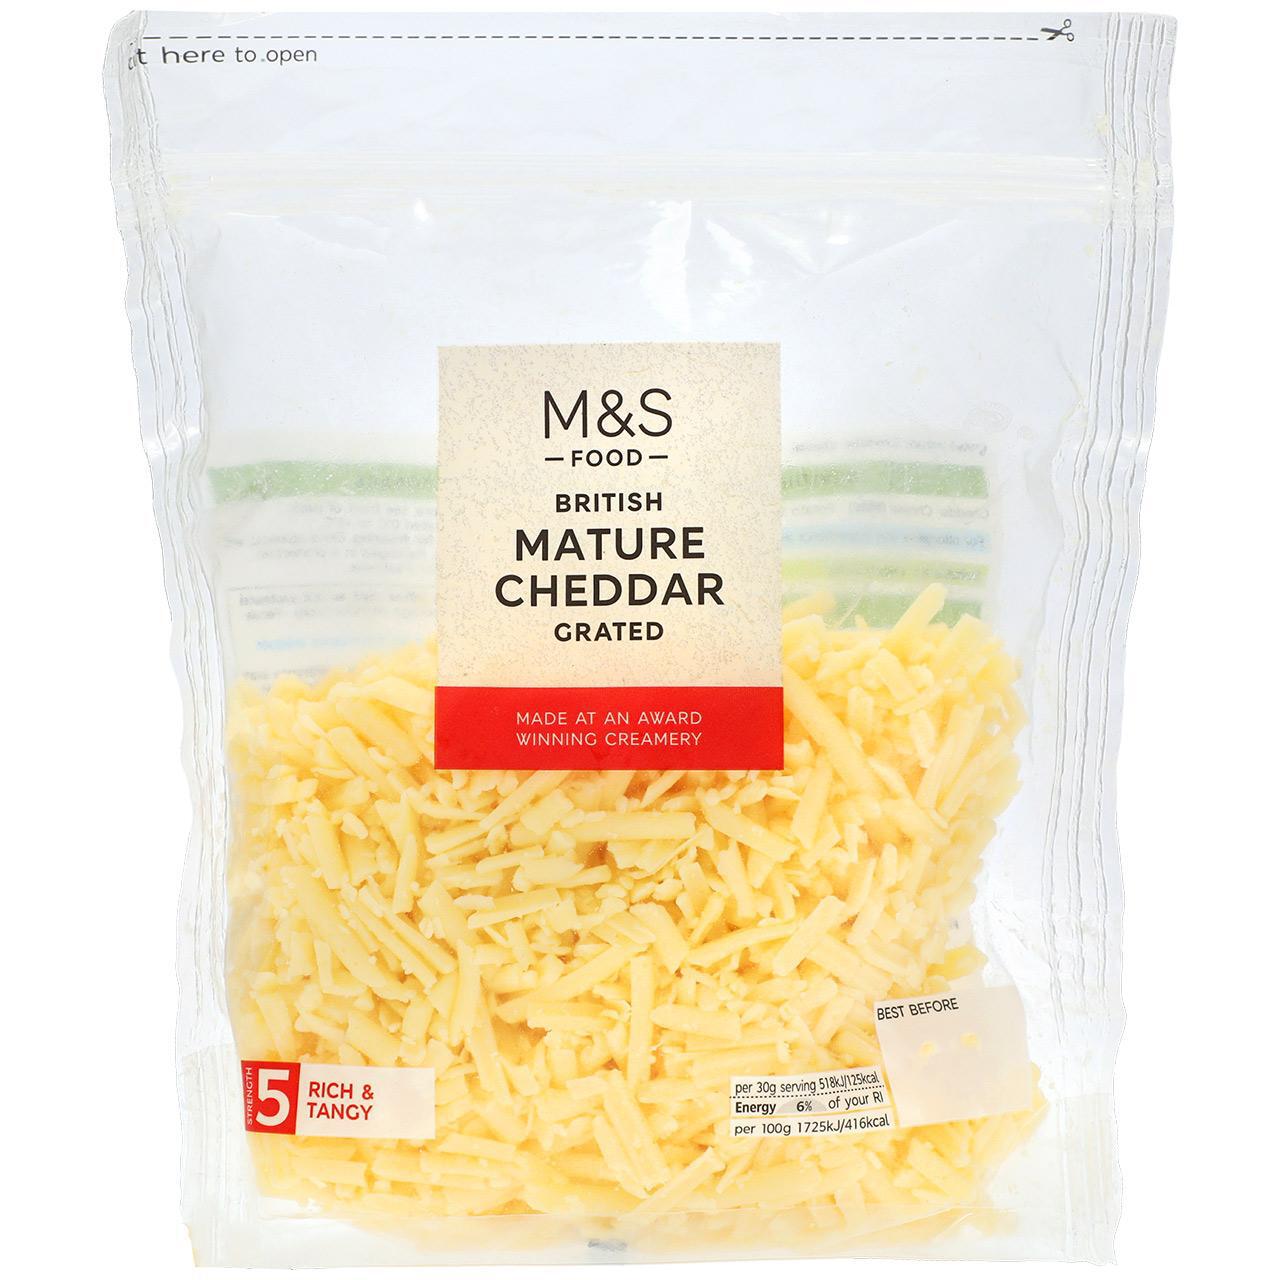 M&S British Mature Grated Cheddar 250g